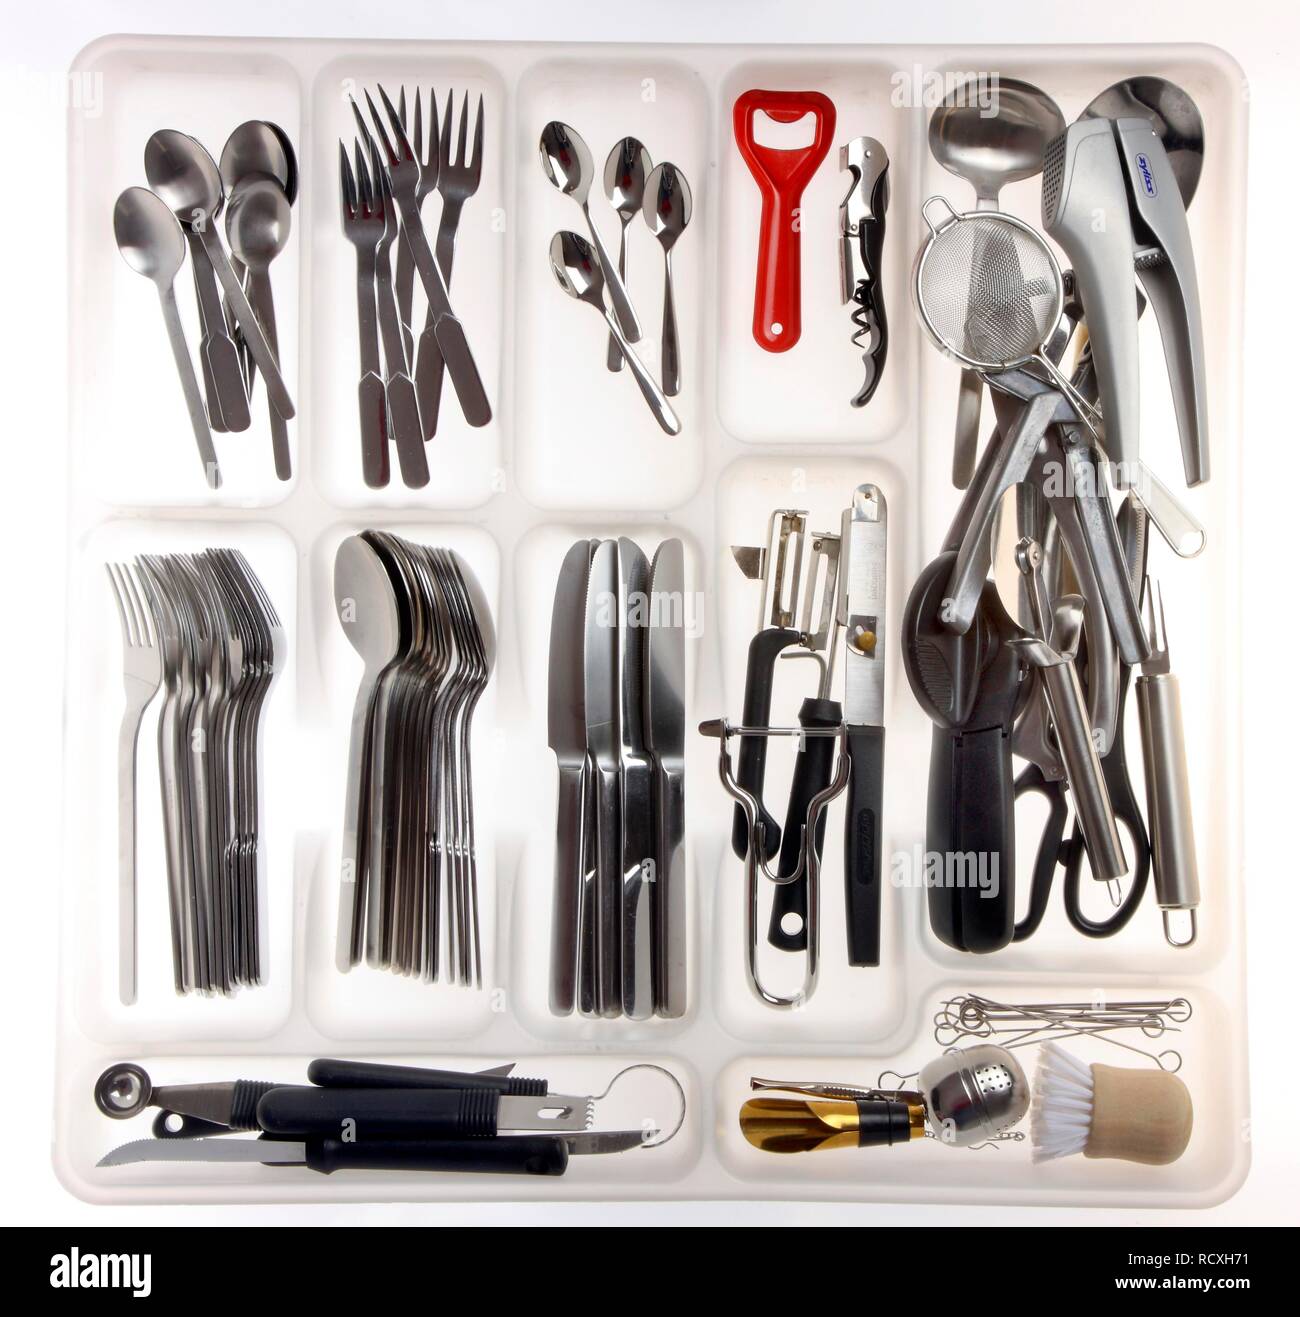 Rack drawer for cutlery, various kitchen tools Stock Photo